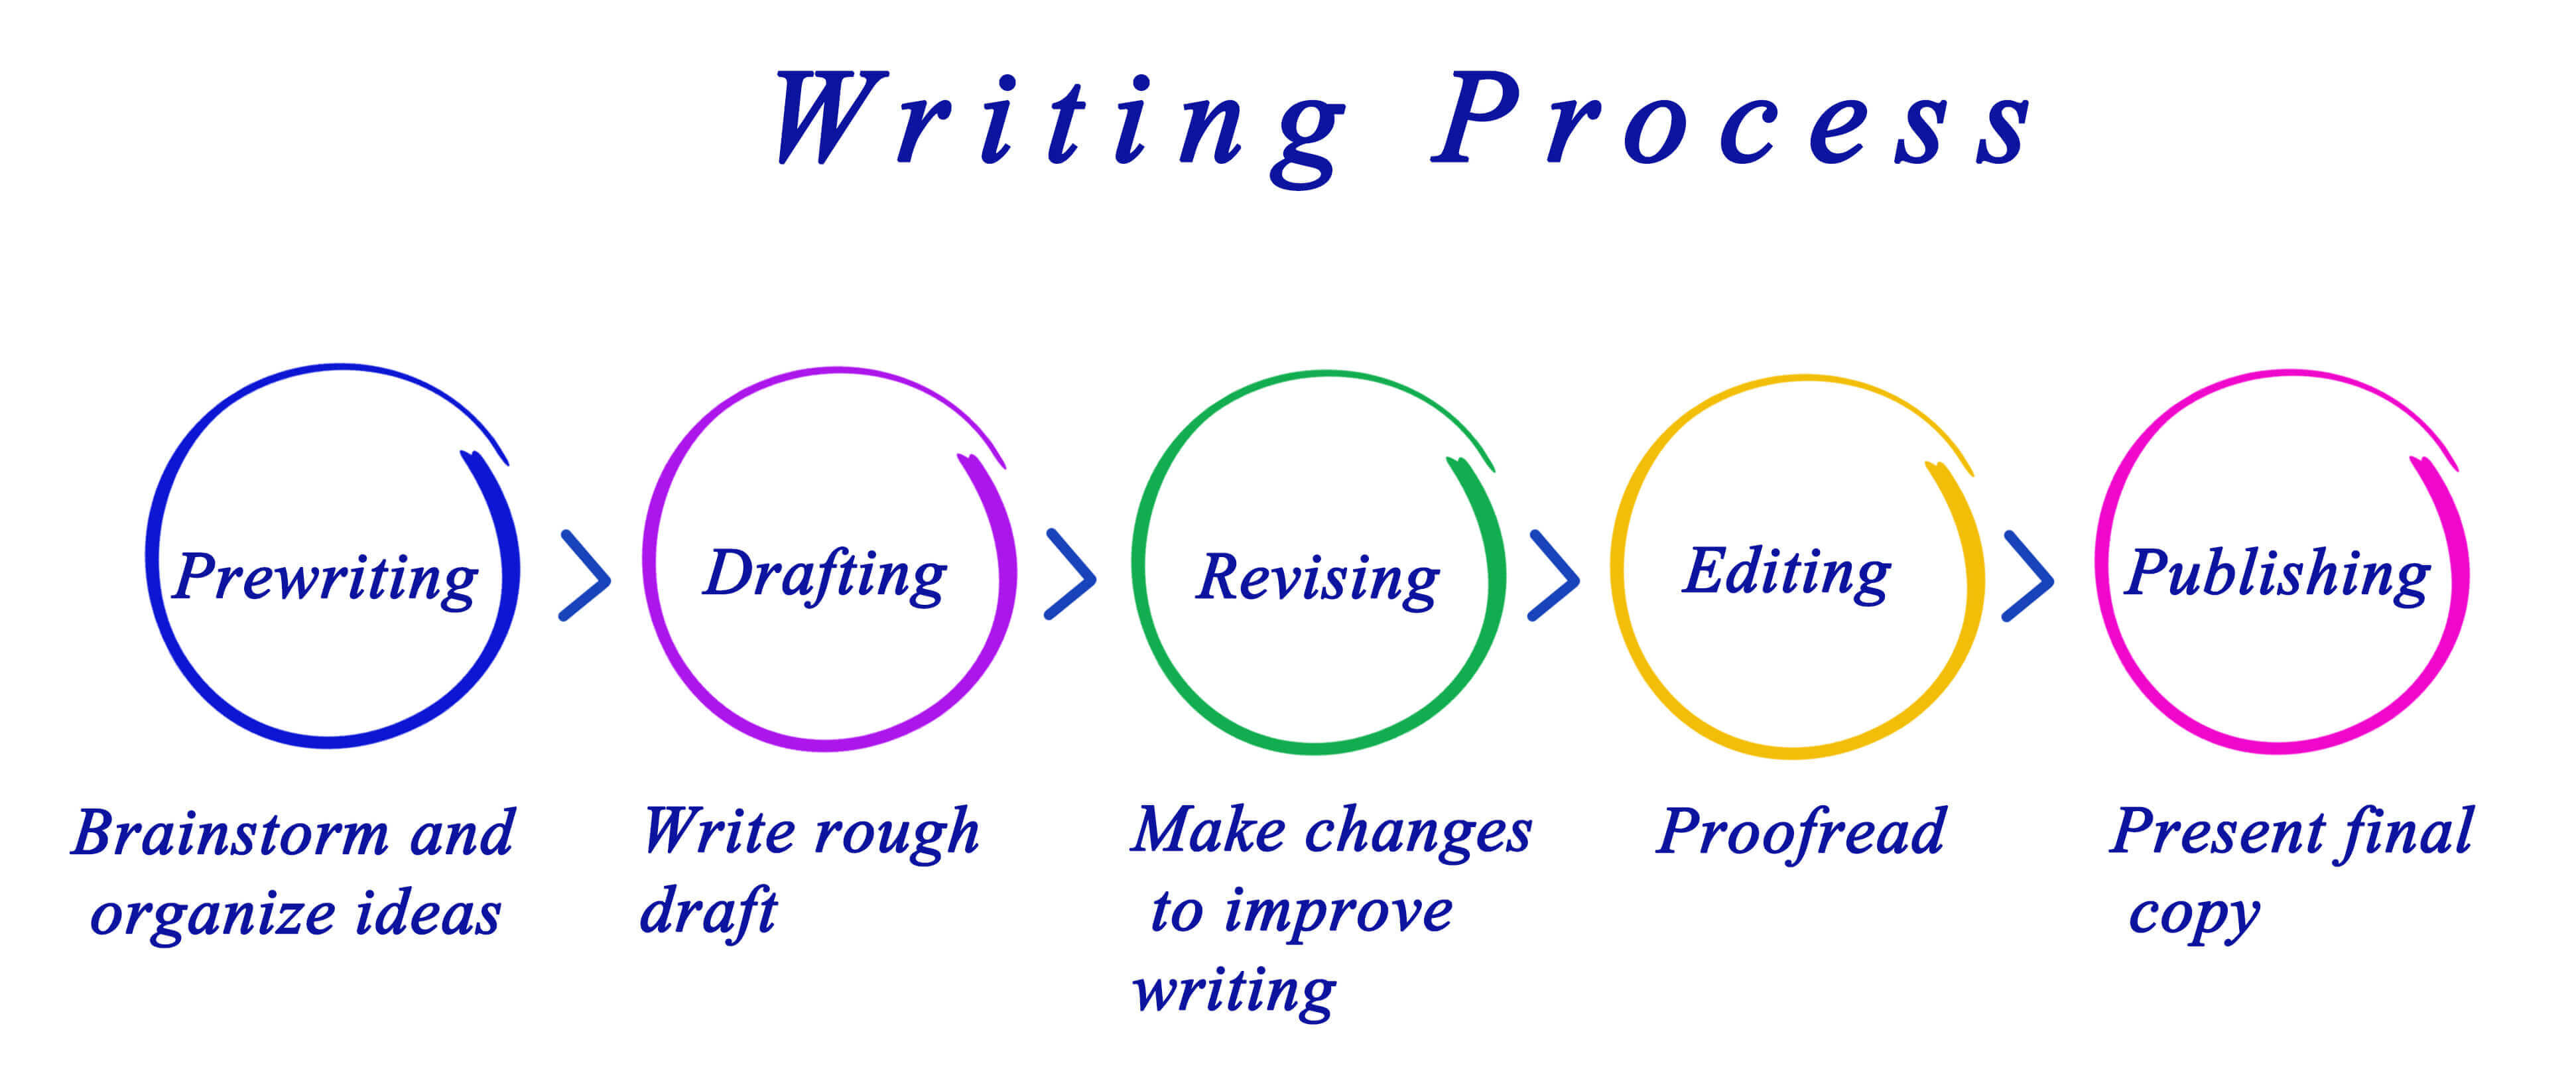 What are some advantages of making copies of a rough draft before editing?